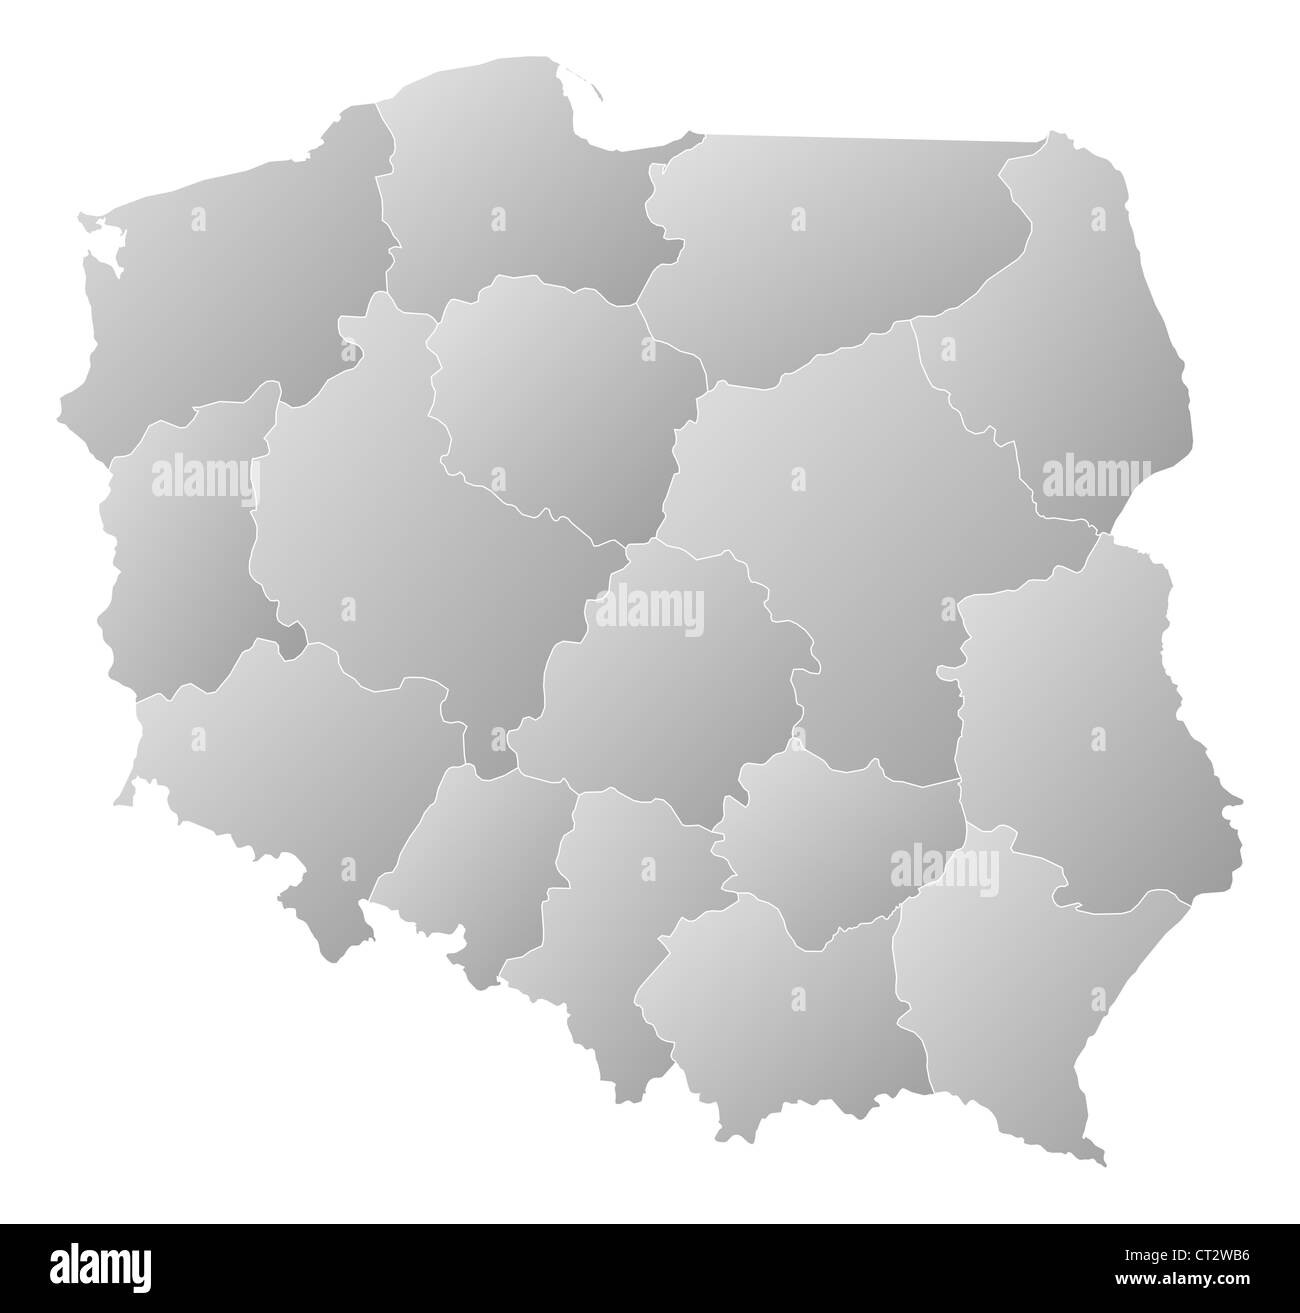 Political map of Poland with the several provinces (voivodschips). Stock Photo